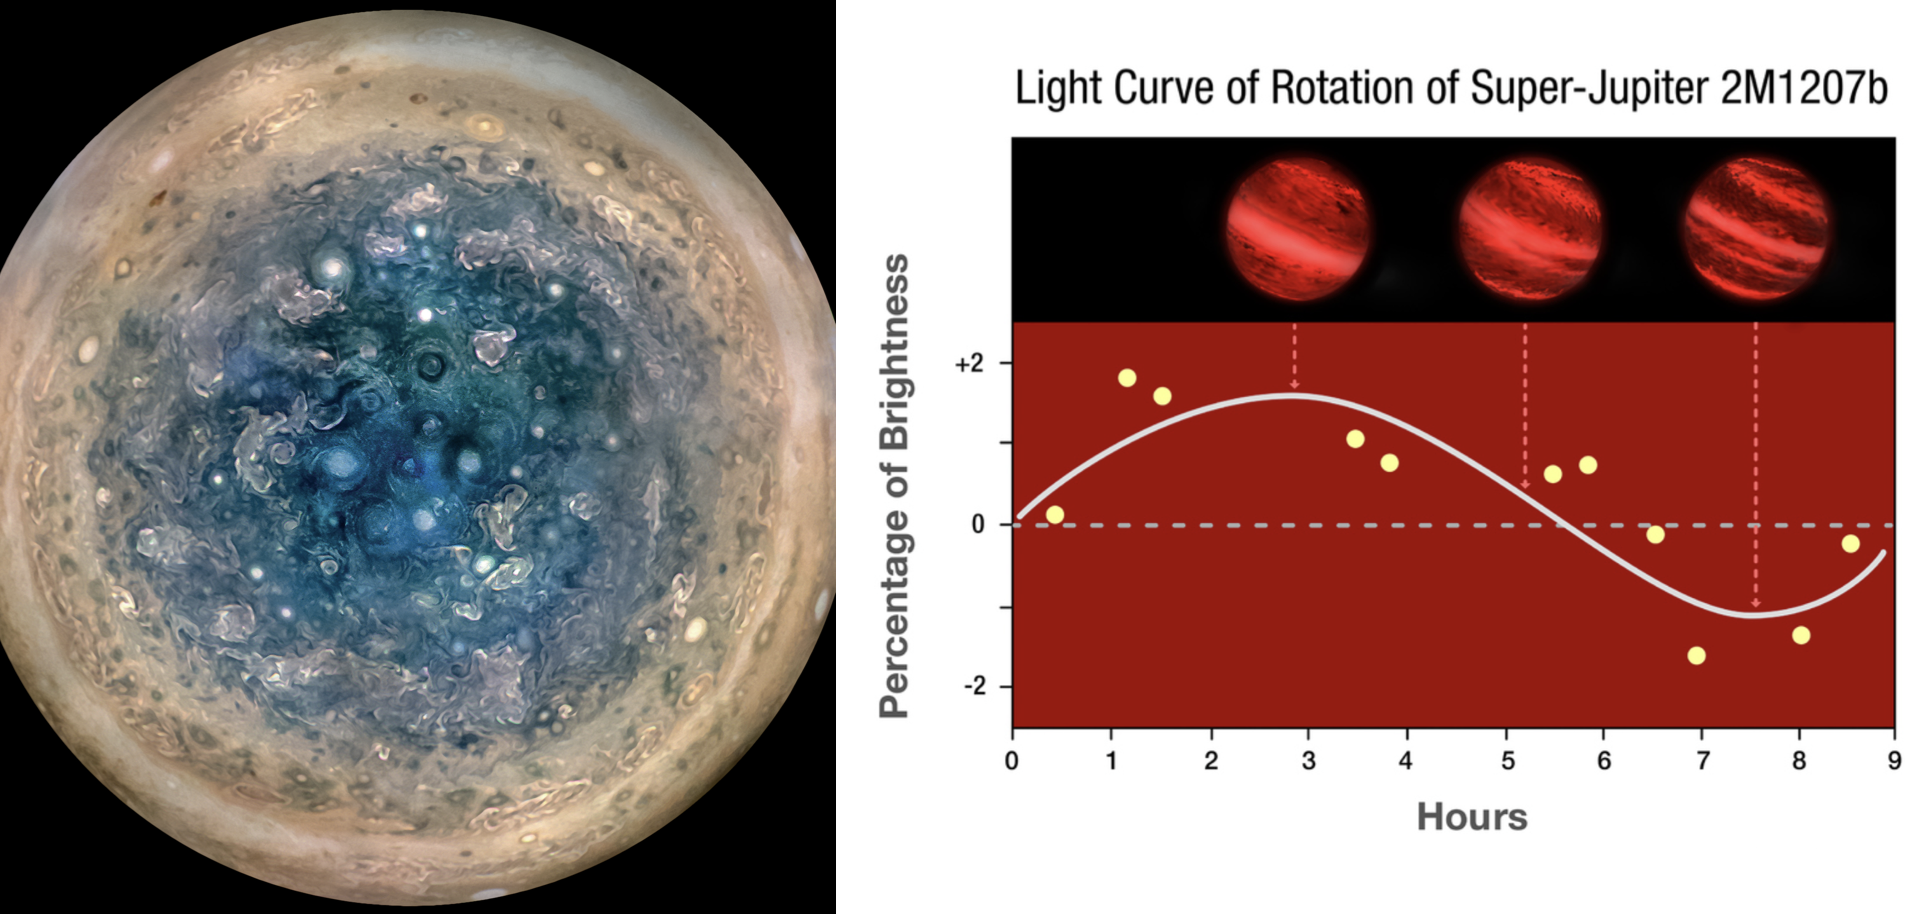 The heterogeneous atmospheres of Jupiter and exoplanets